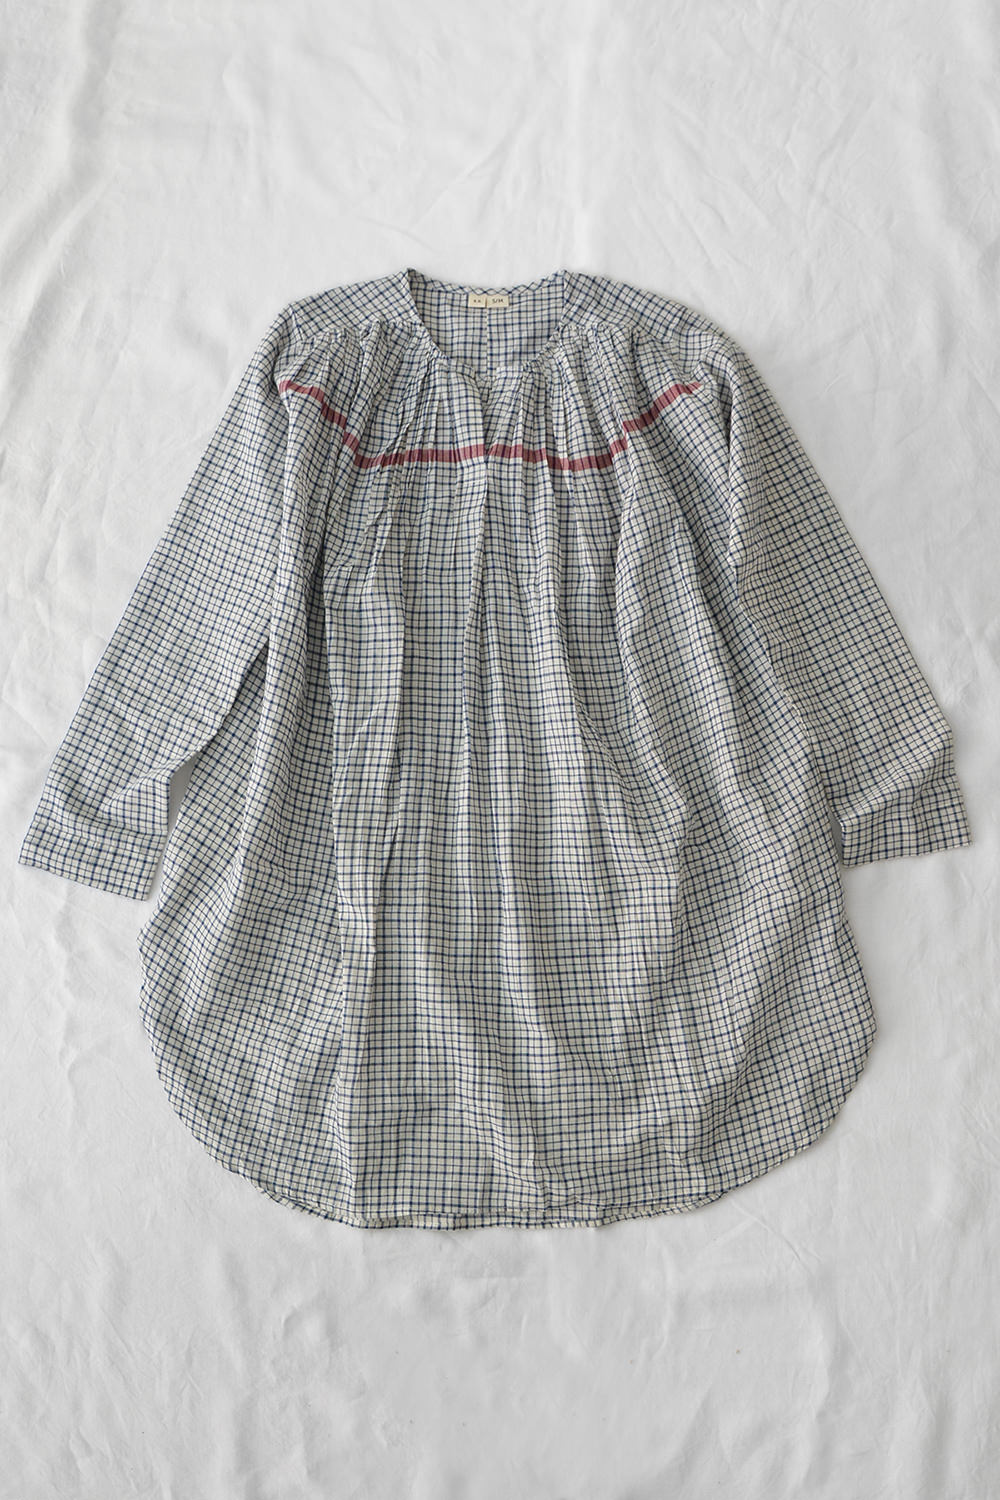 Runaway Bicycle Long Blouse Gray Gingham Top Picture